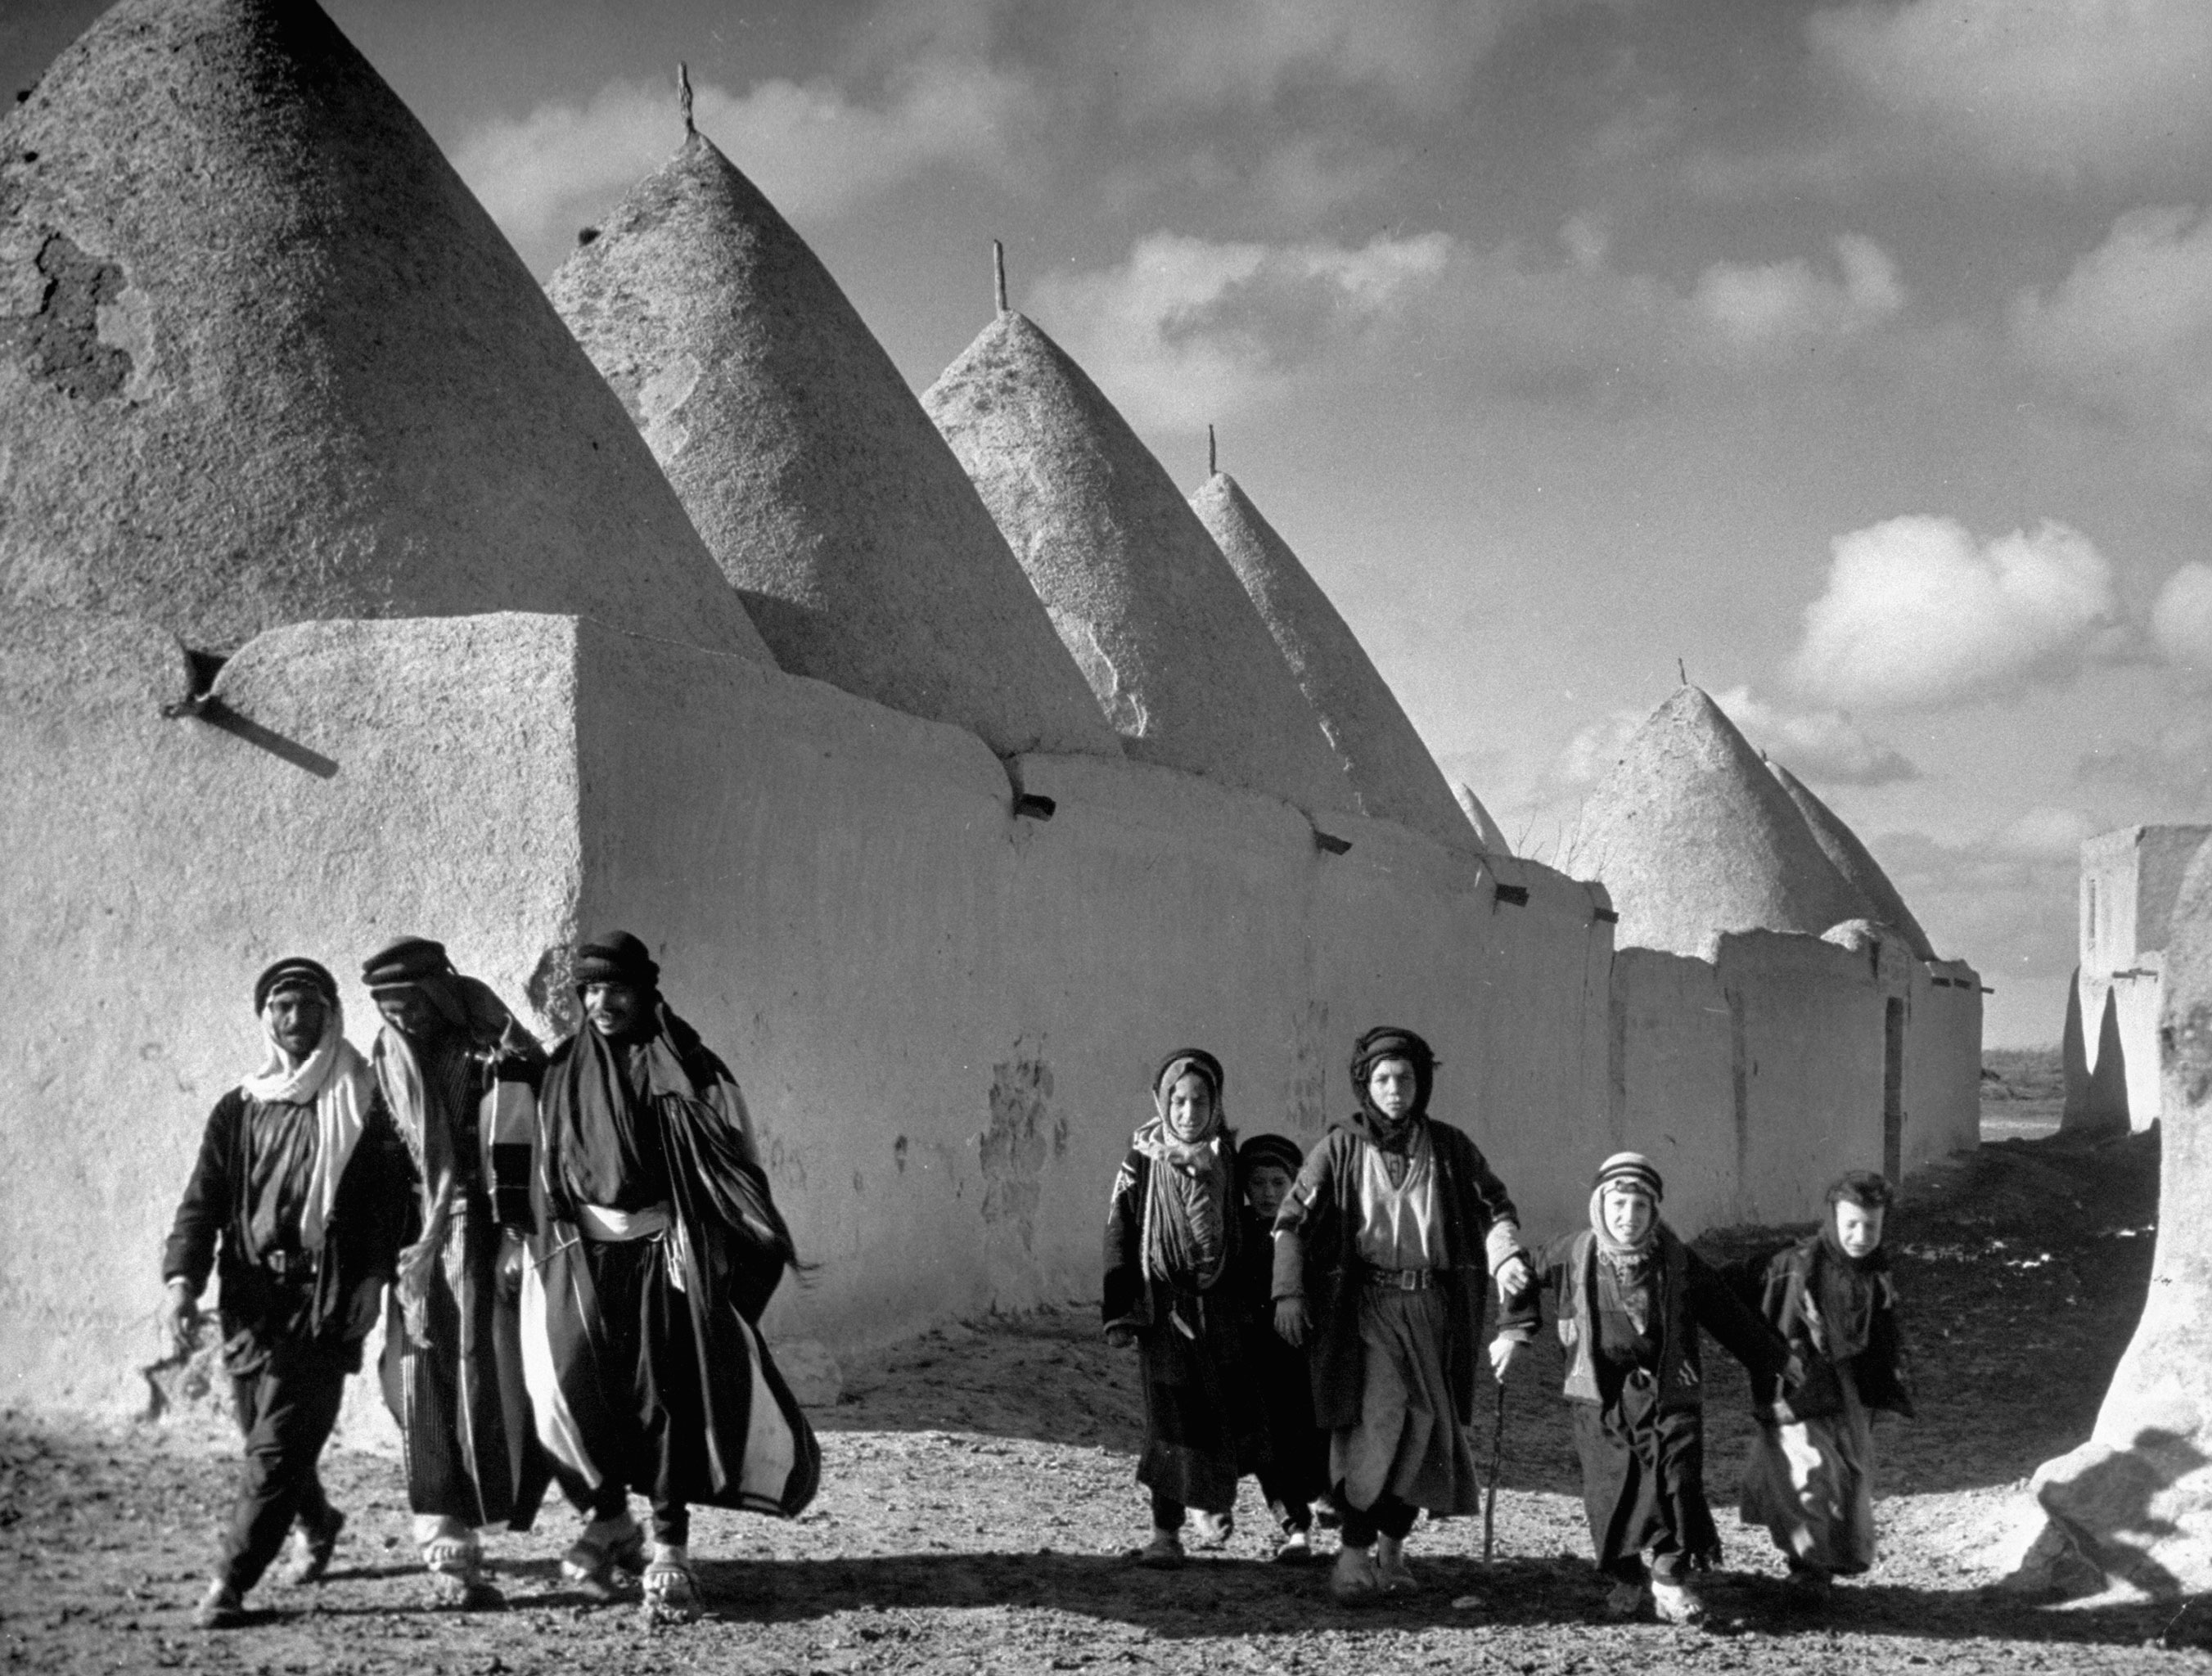 A family walks past the walled town and beehive-shaped homes of Tell Bisse, Syria, 1940.